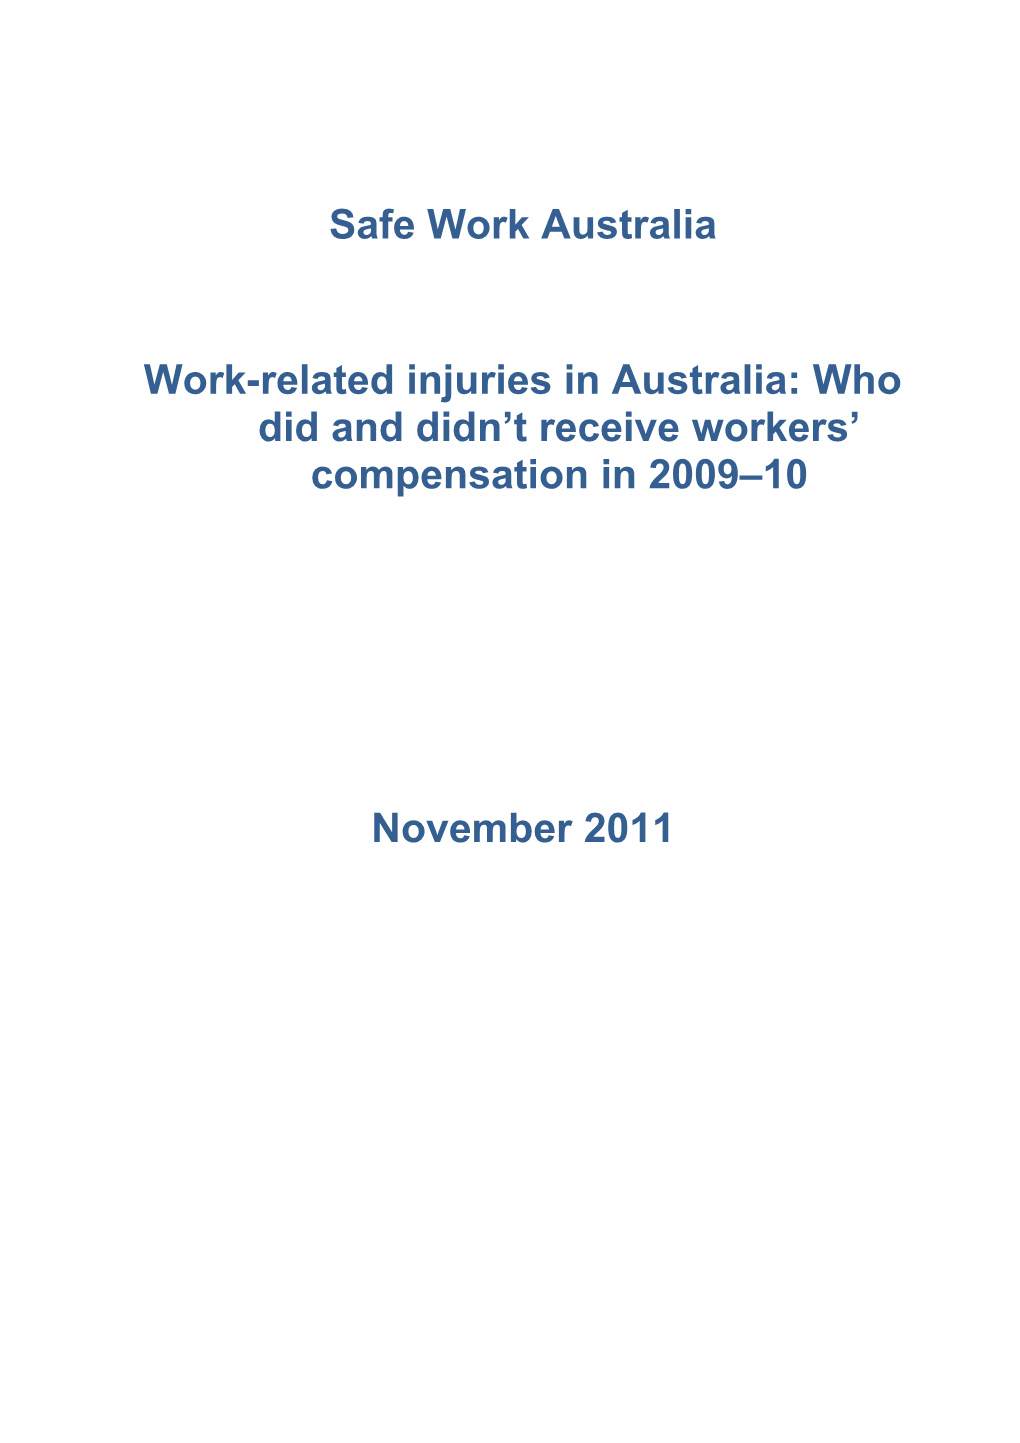 Work-Related Injuries in Australia: Who Did and Didn't Receive Workers' Compensation in 2009-10